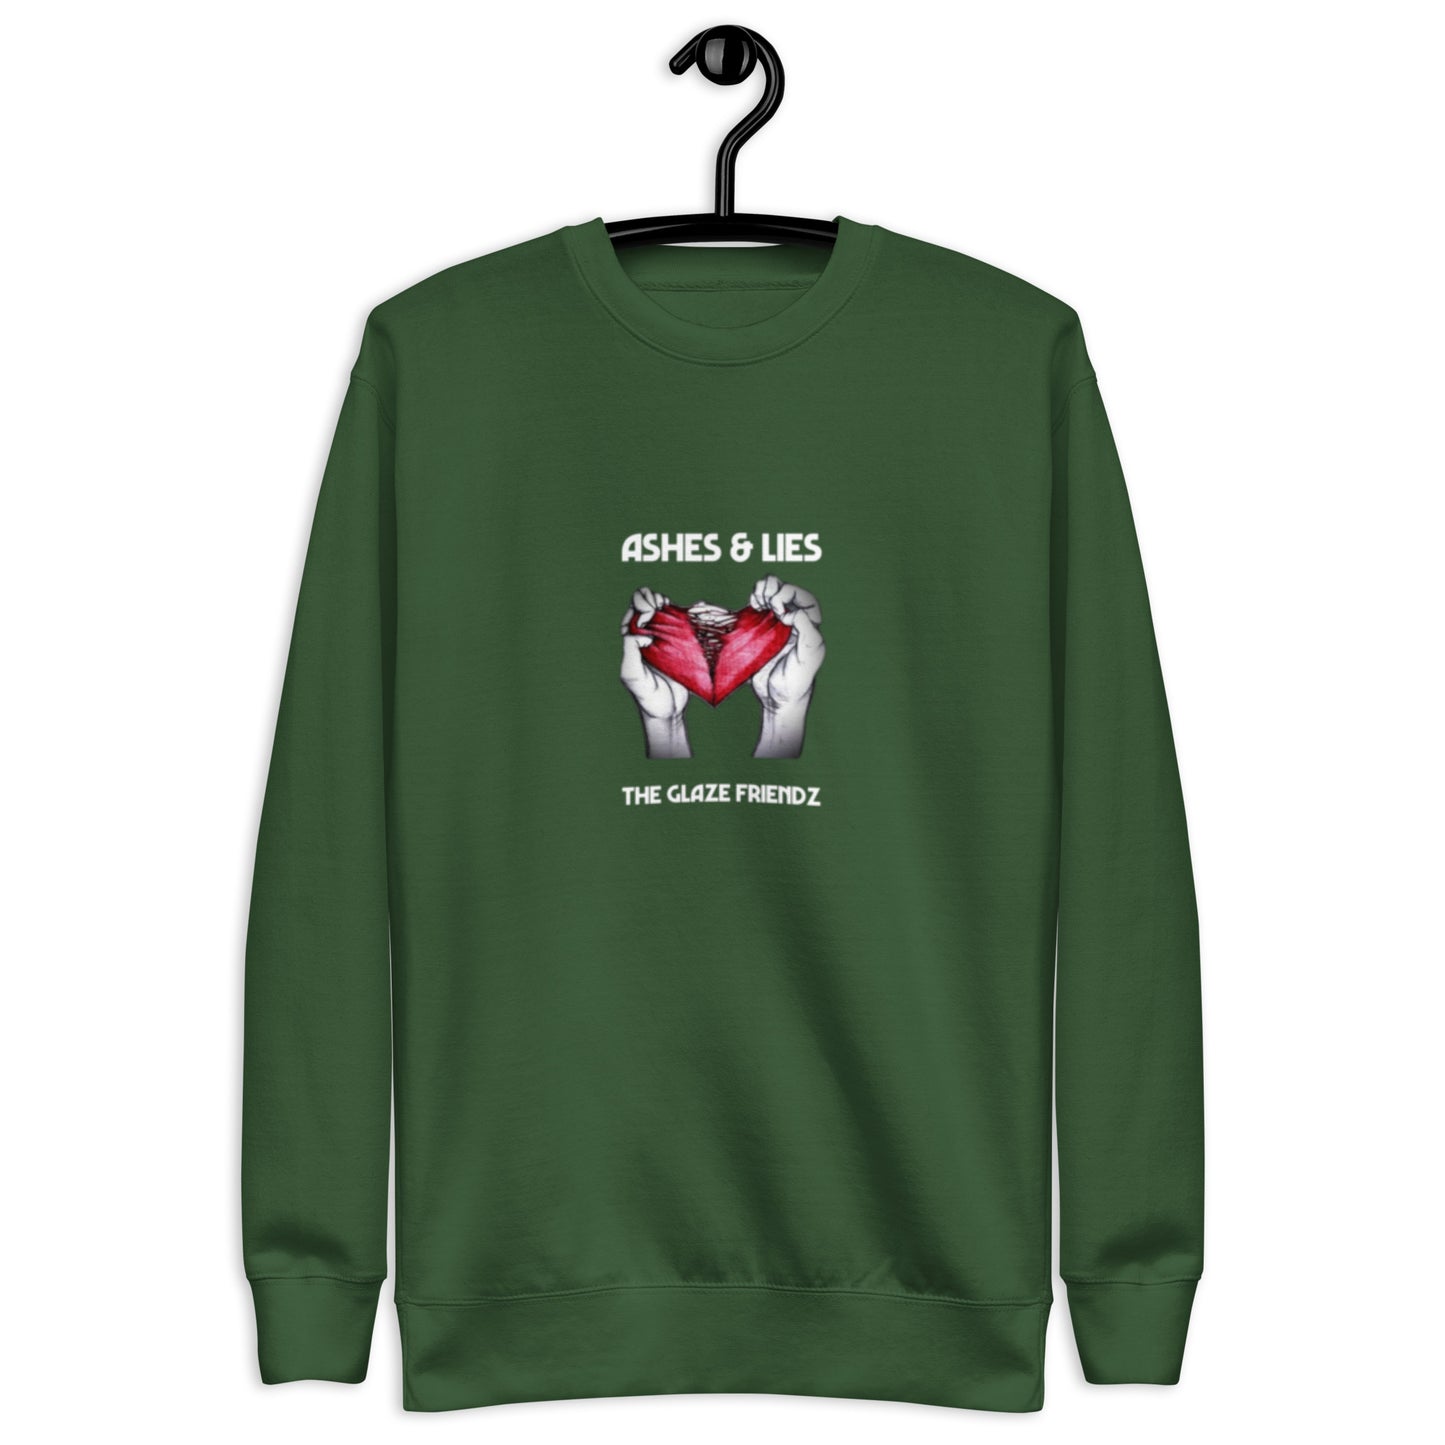 AHES AND LIES Premium Sweatshirt Limited Edition